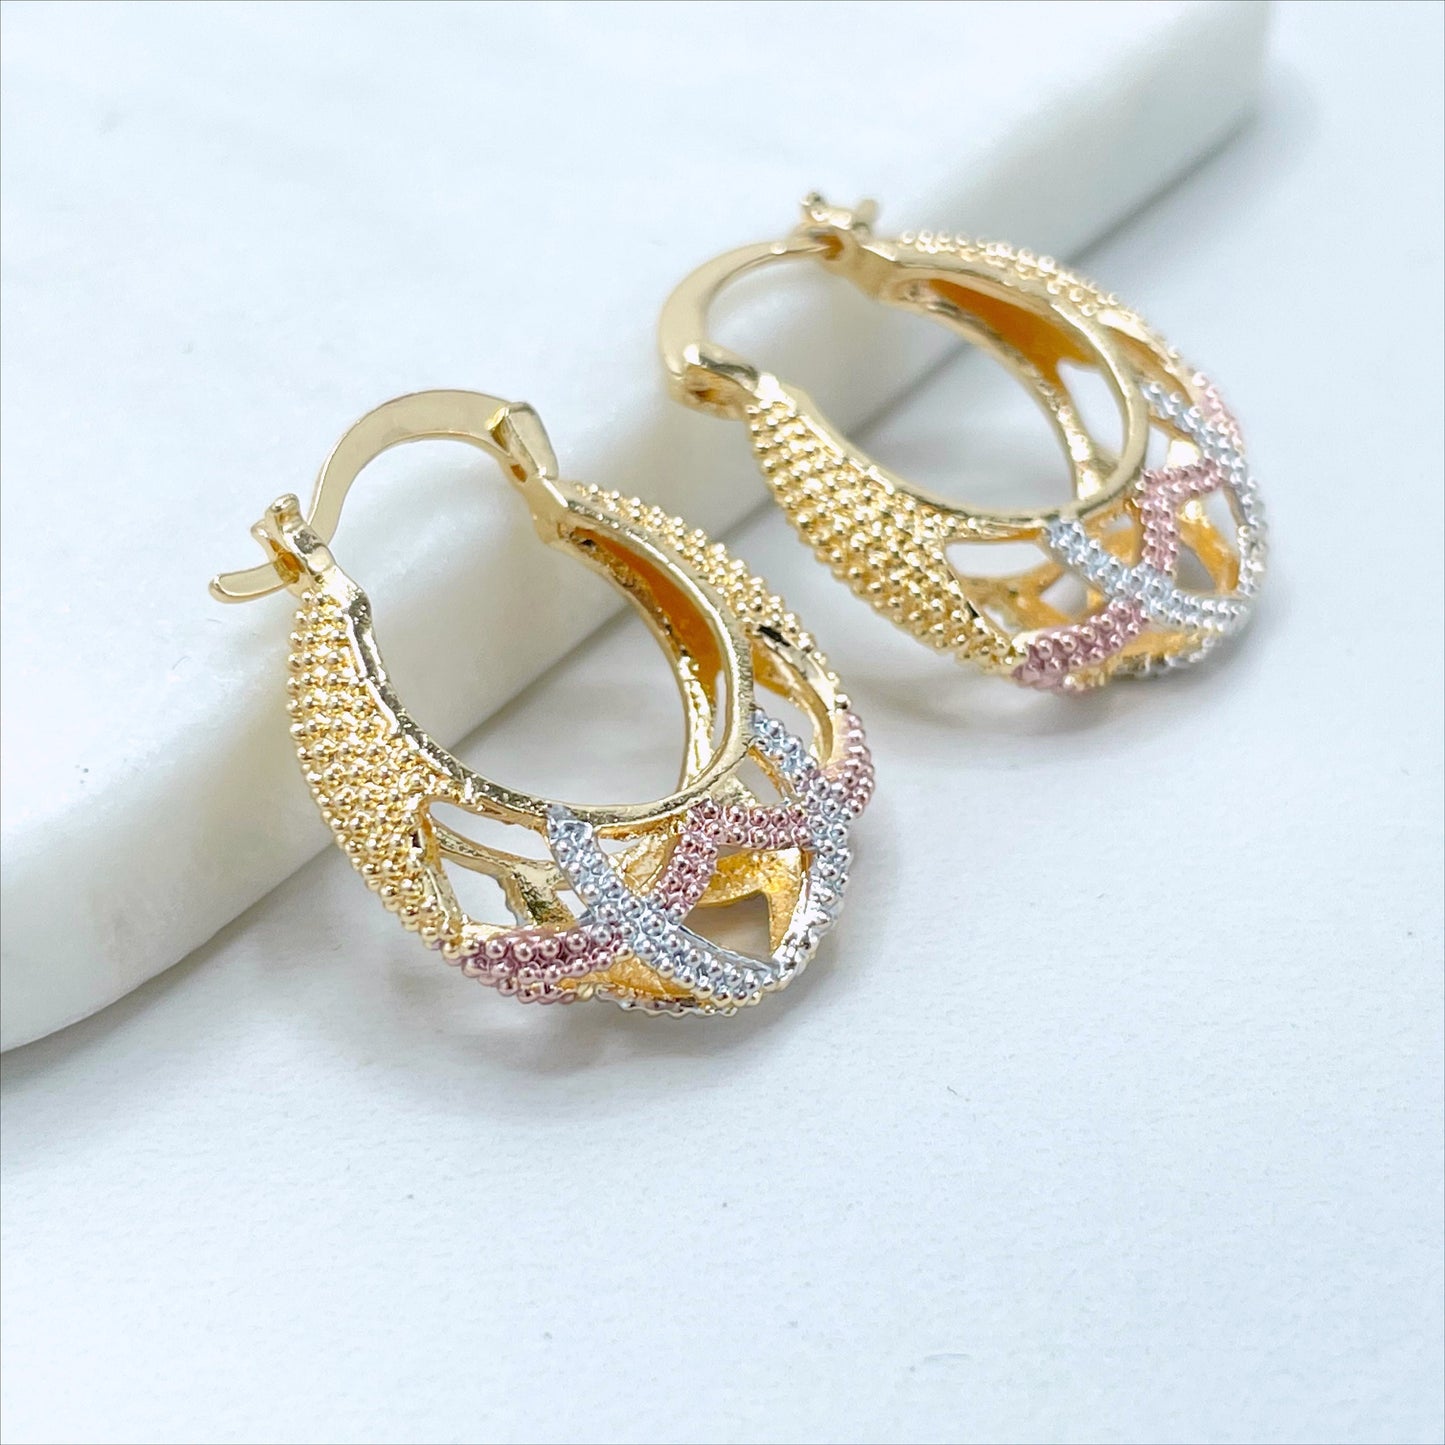 18k Gold Filled Tree Tone, Thee Color 22mm Basket Design Hoop Earrings, 6mm Thickness, Wholesale Jewelry Making Supplies